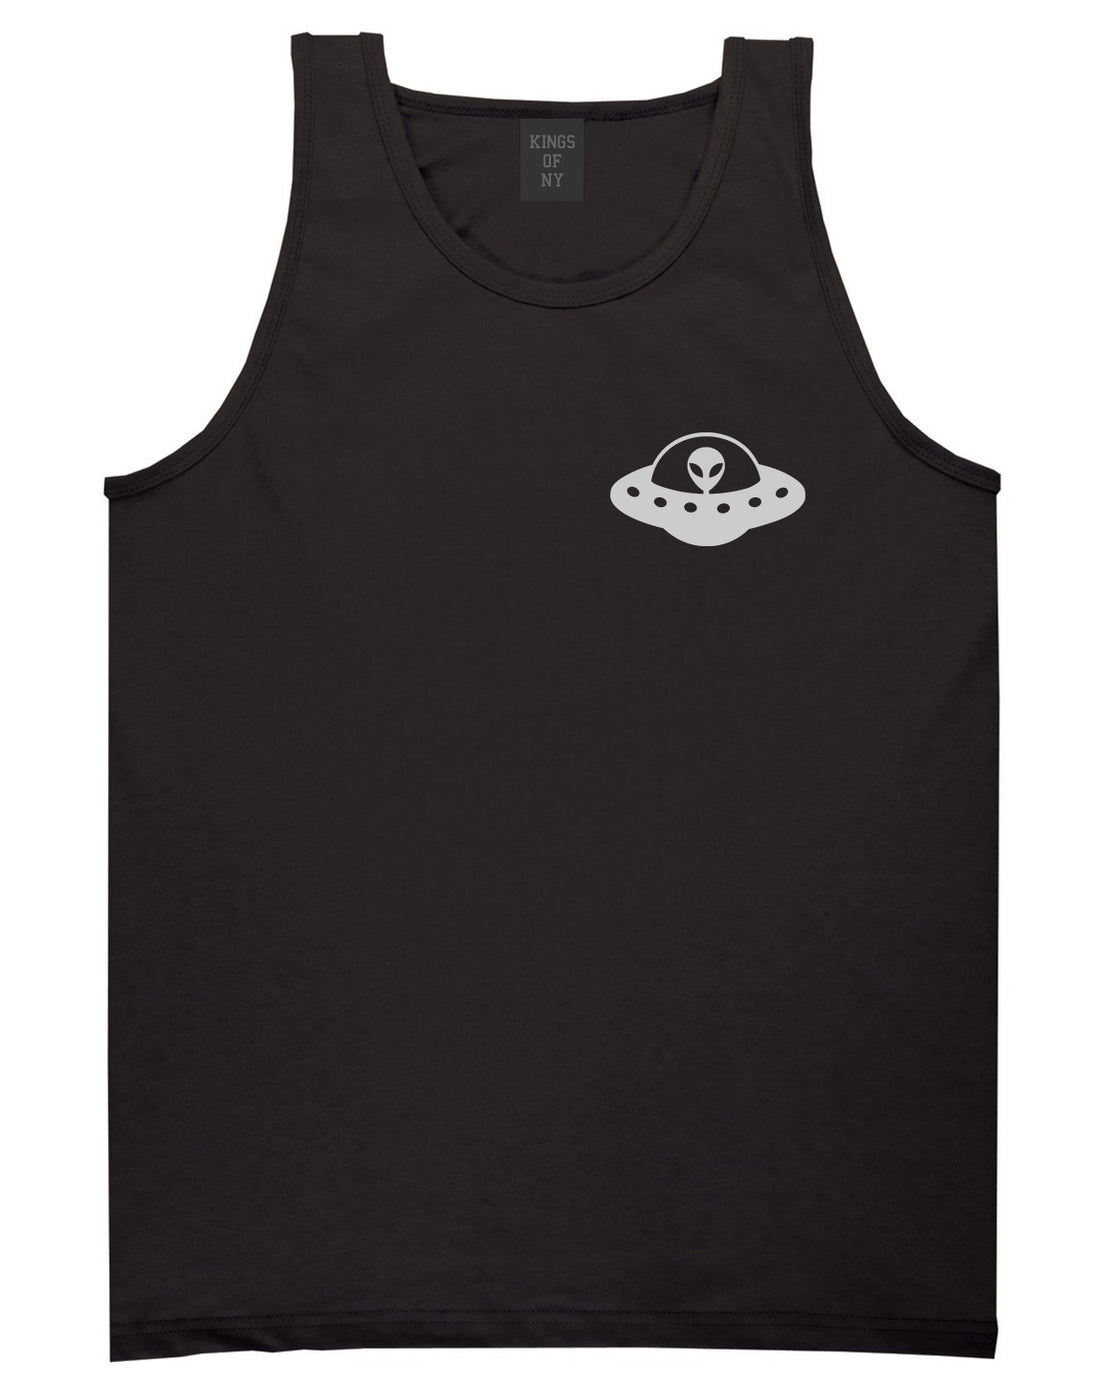 Alien_Spaceship_Chest Mens Black Tank Top Shirt by Kings Of NY